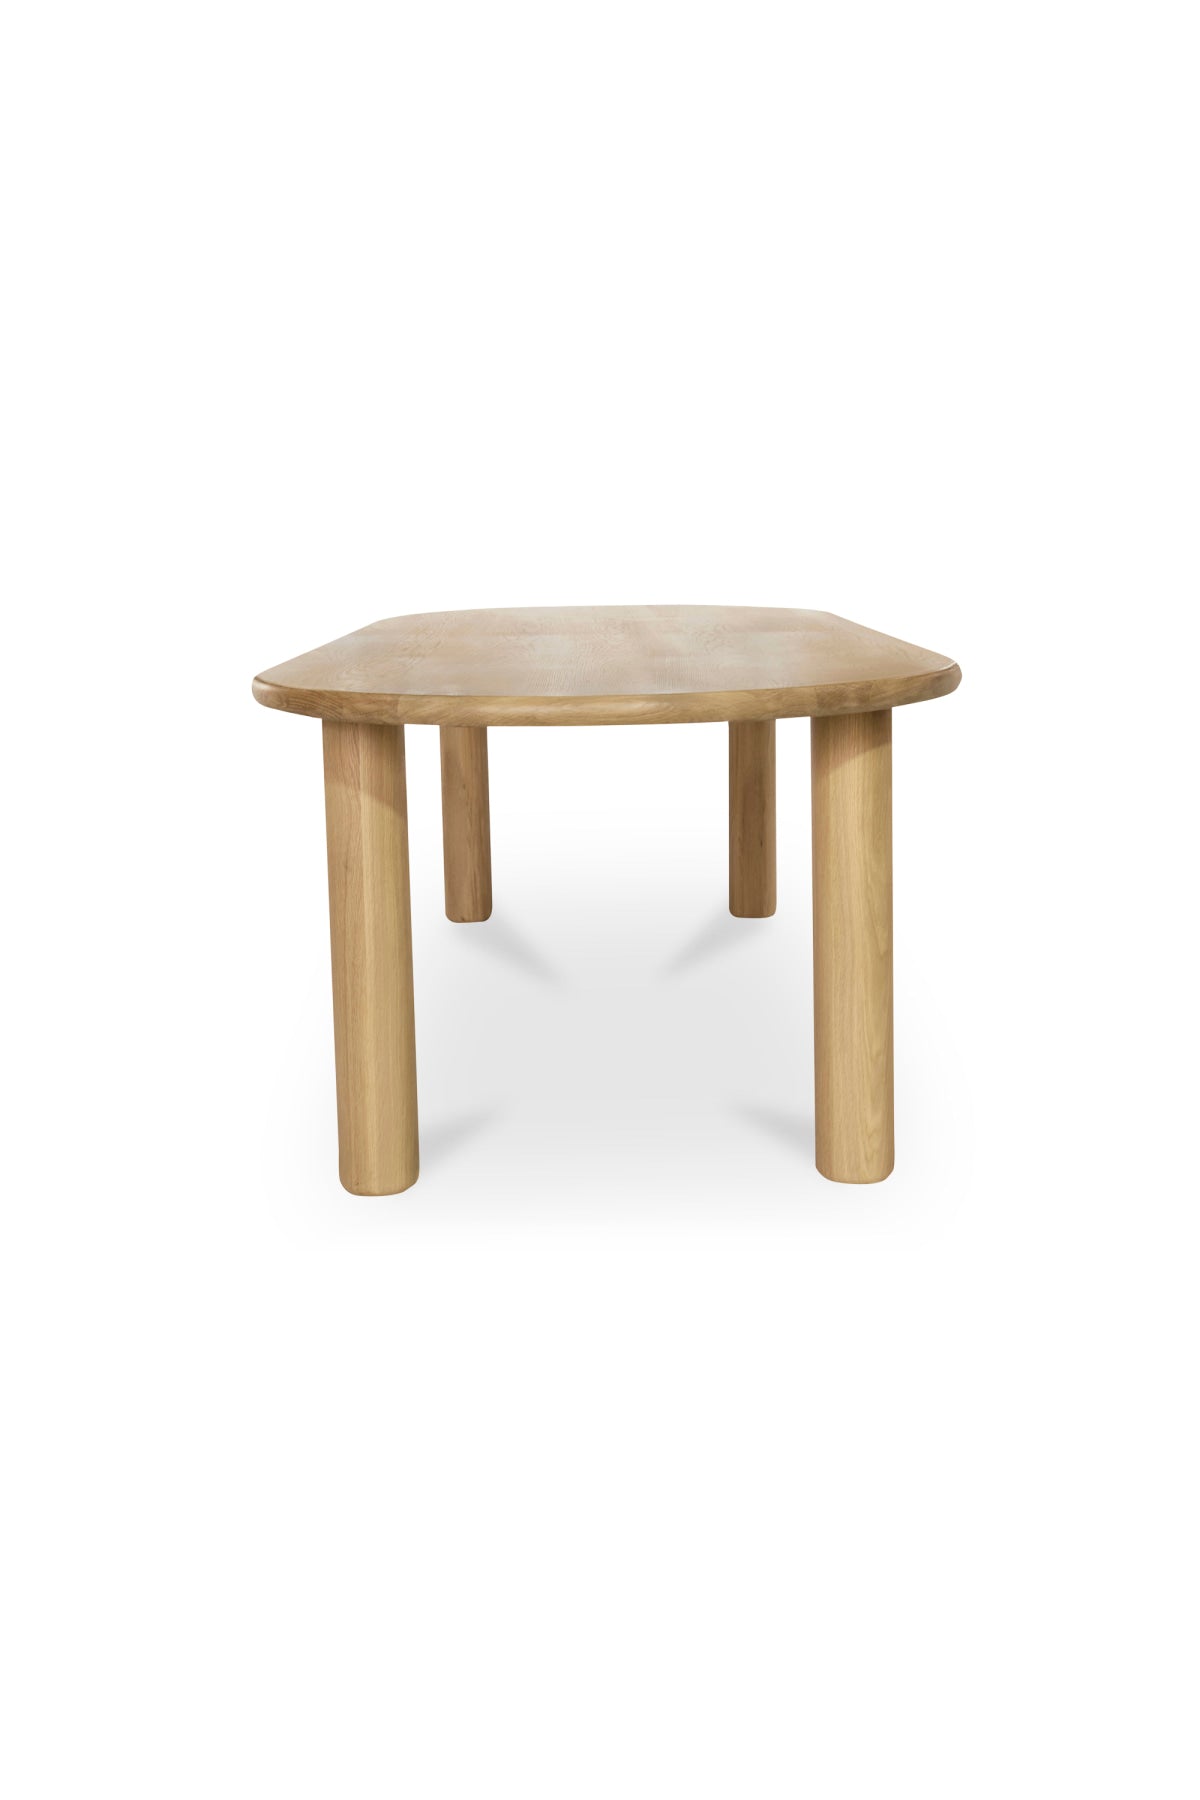 Dundee Dining Table - 2 Sizes